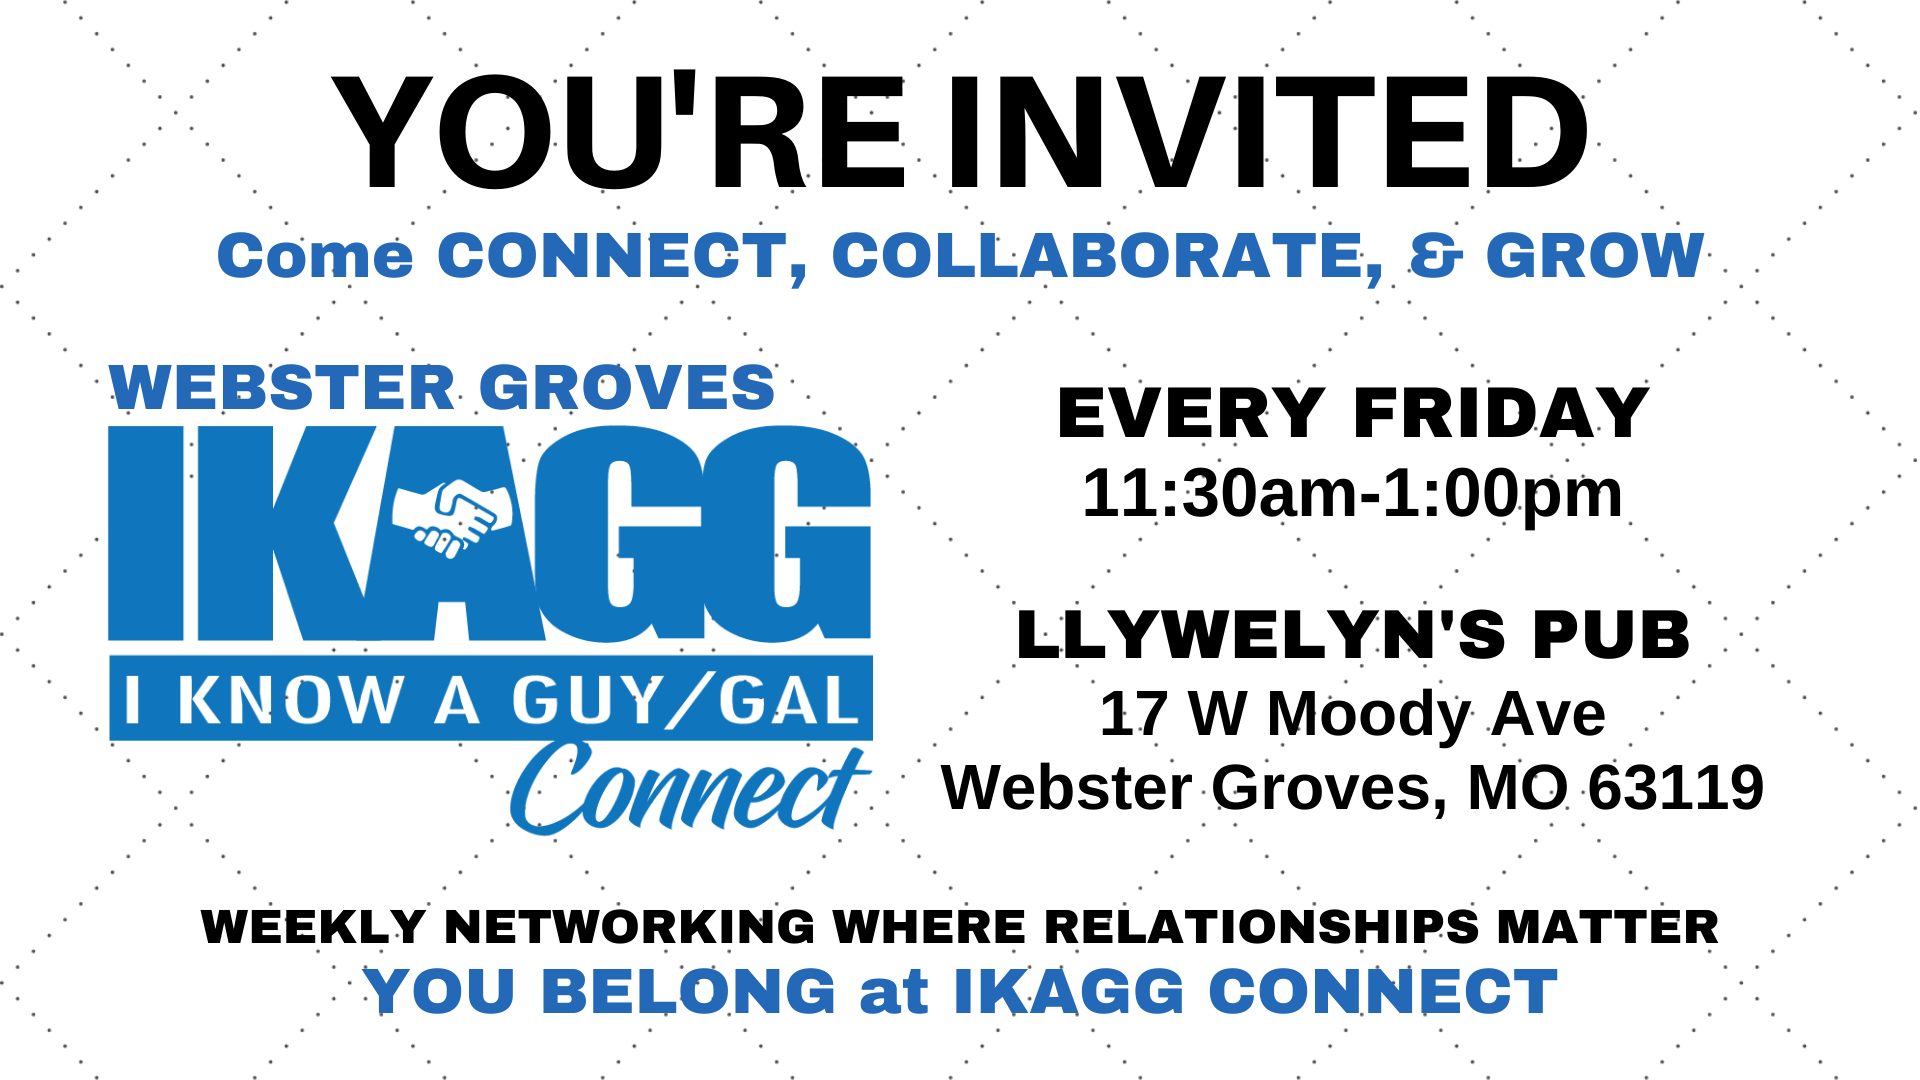 Webster Groves IKAGG CONNECT Weekly Meeting